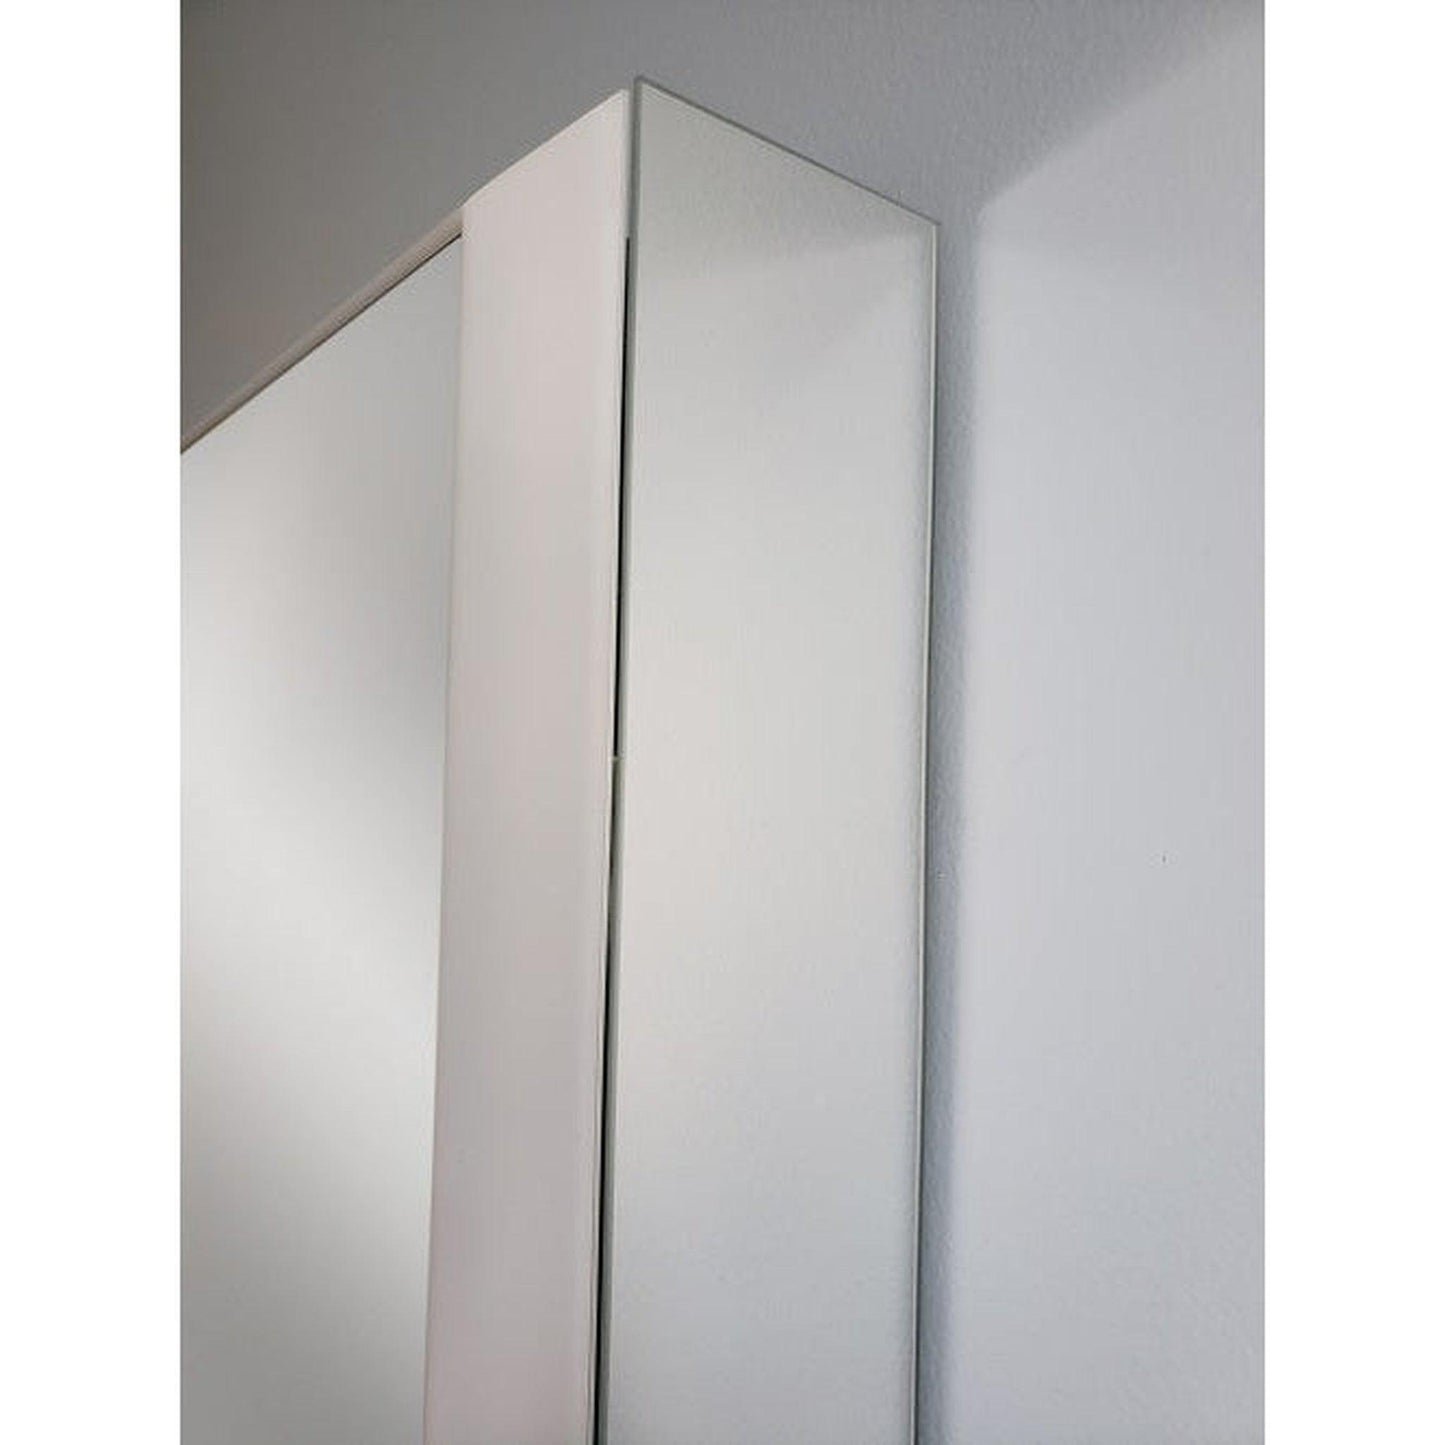 Sidler Quadro 24" x 36" 4000K Single Right Hinged Mirror Door Anodized Aluminum Medicine Cabinet With Night Light Function, Built-in GFCI Outlet and USB port